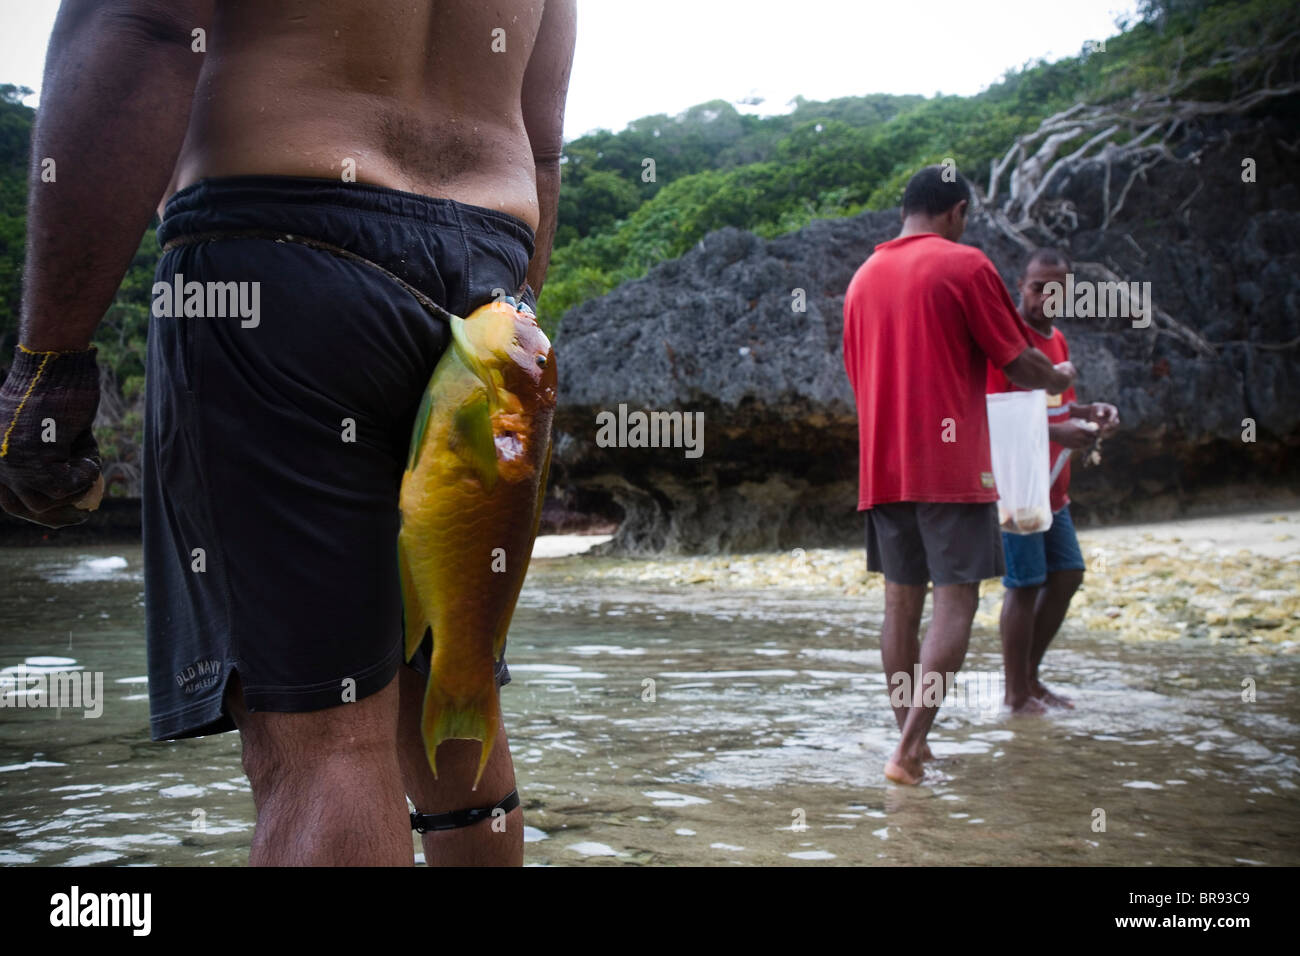 A fish hangs on a makeshift belt of a spear fisherman. Stock Photo